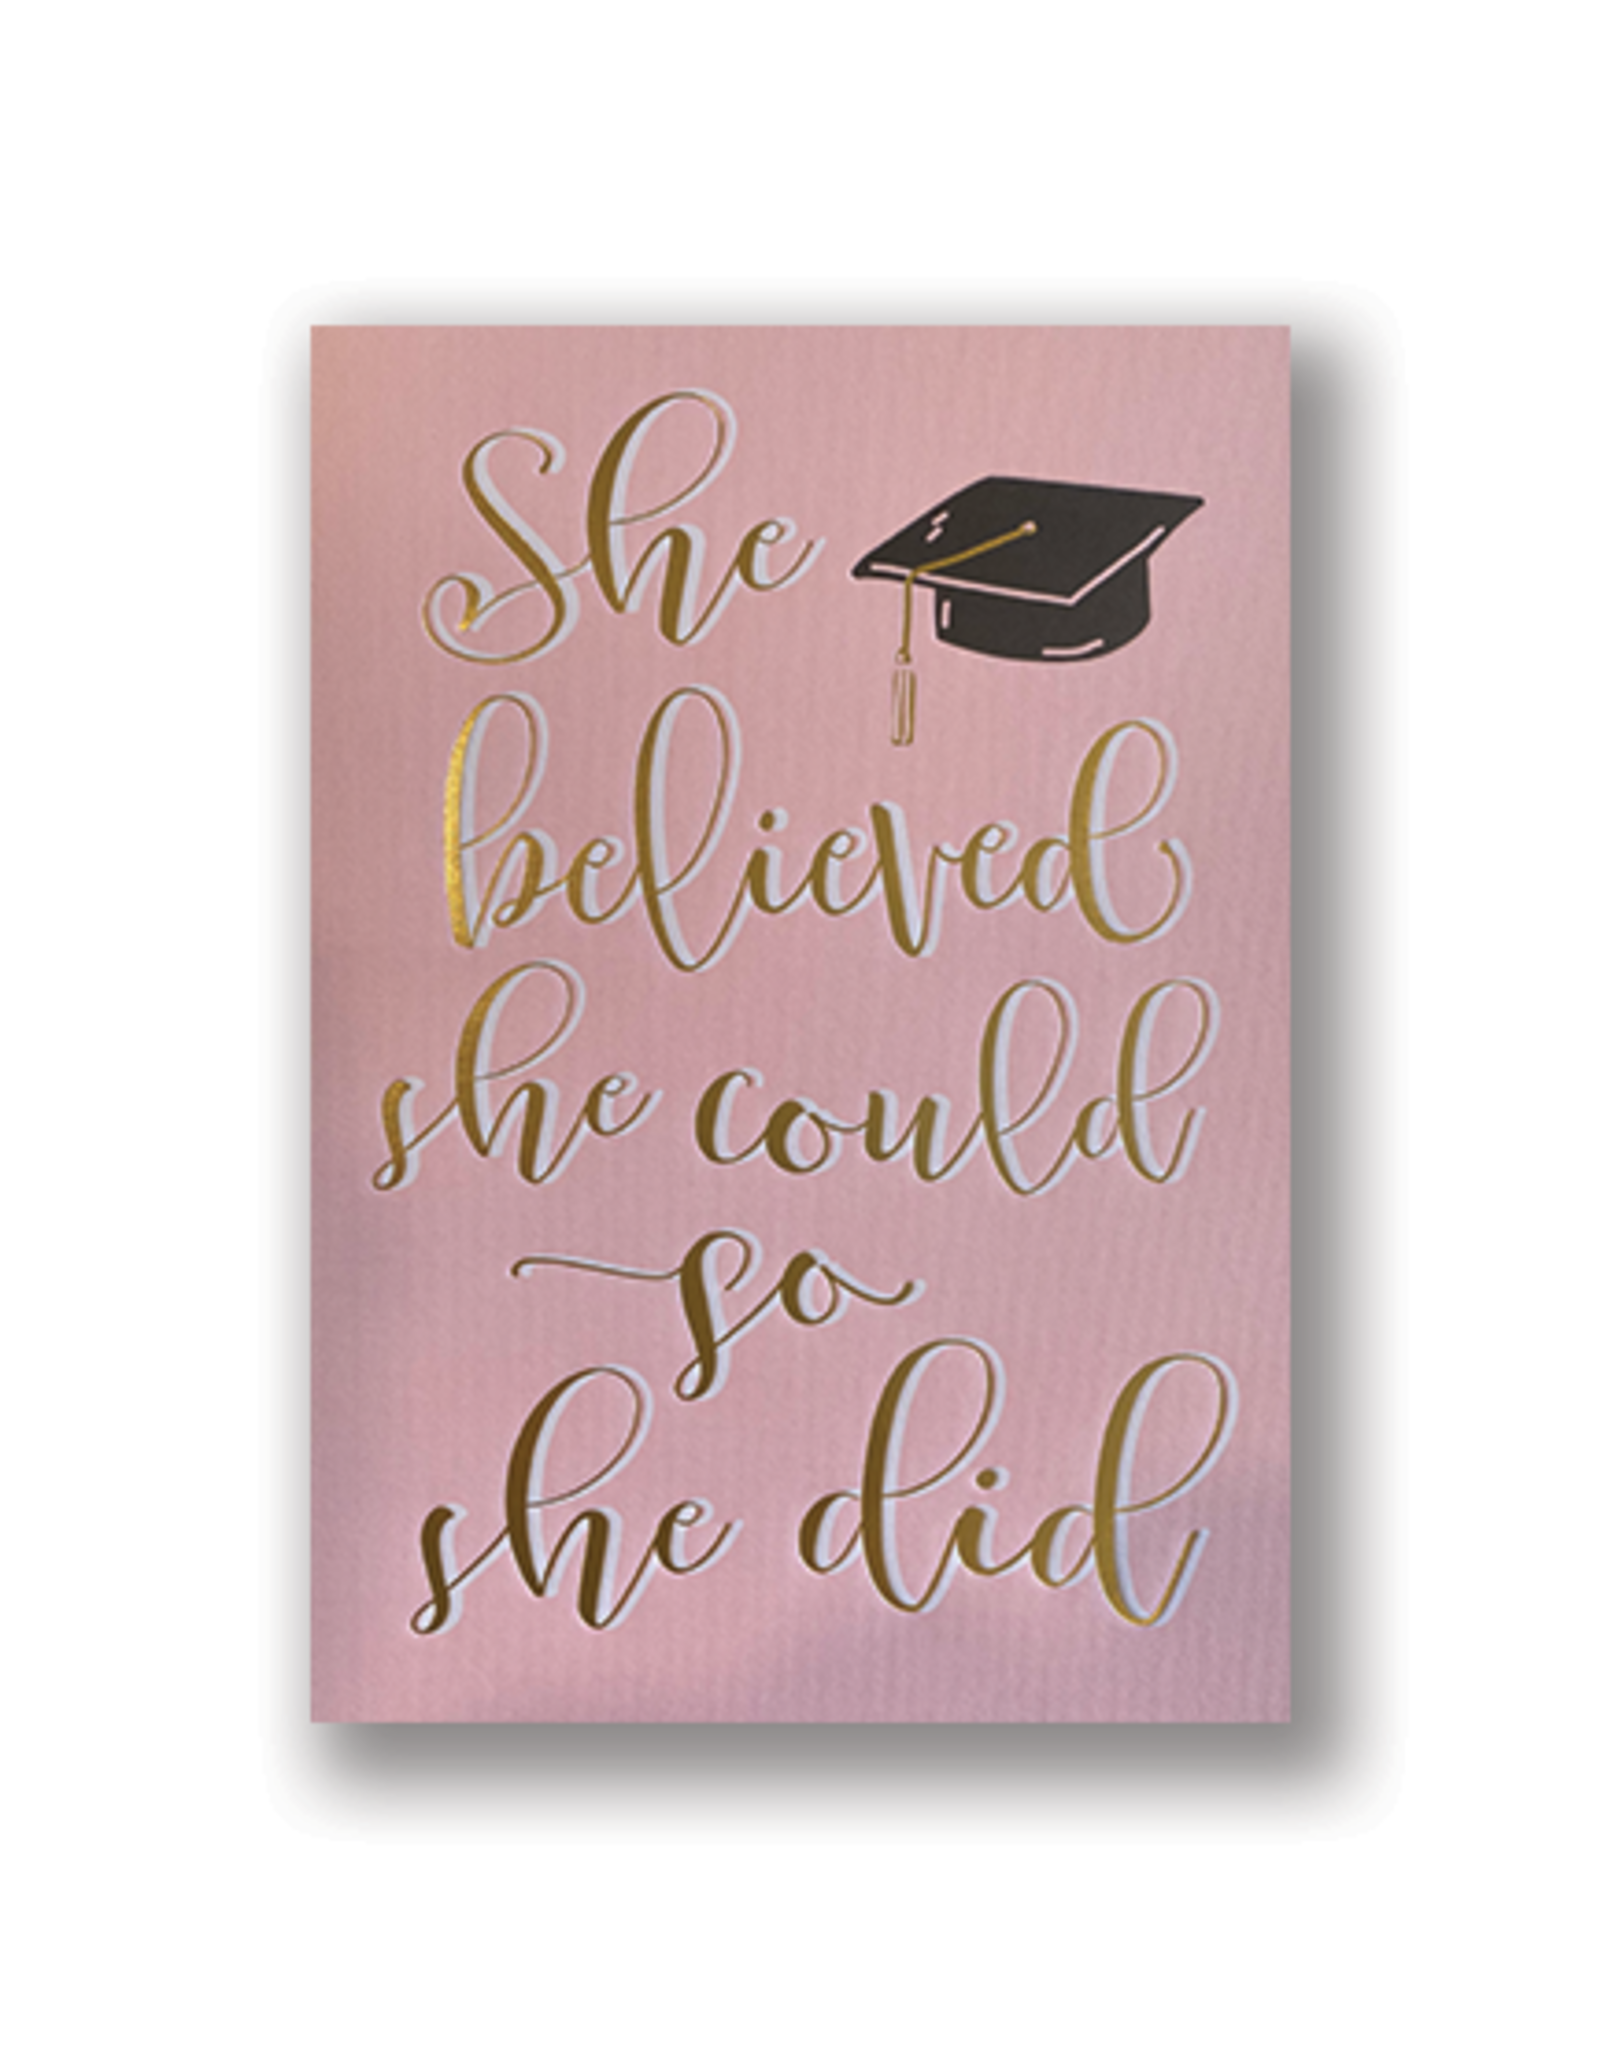 "She believed she could so she did" Graduation Card